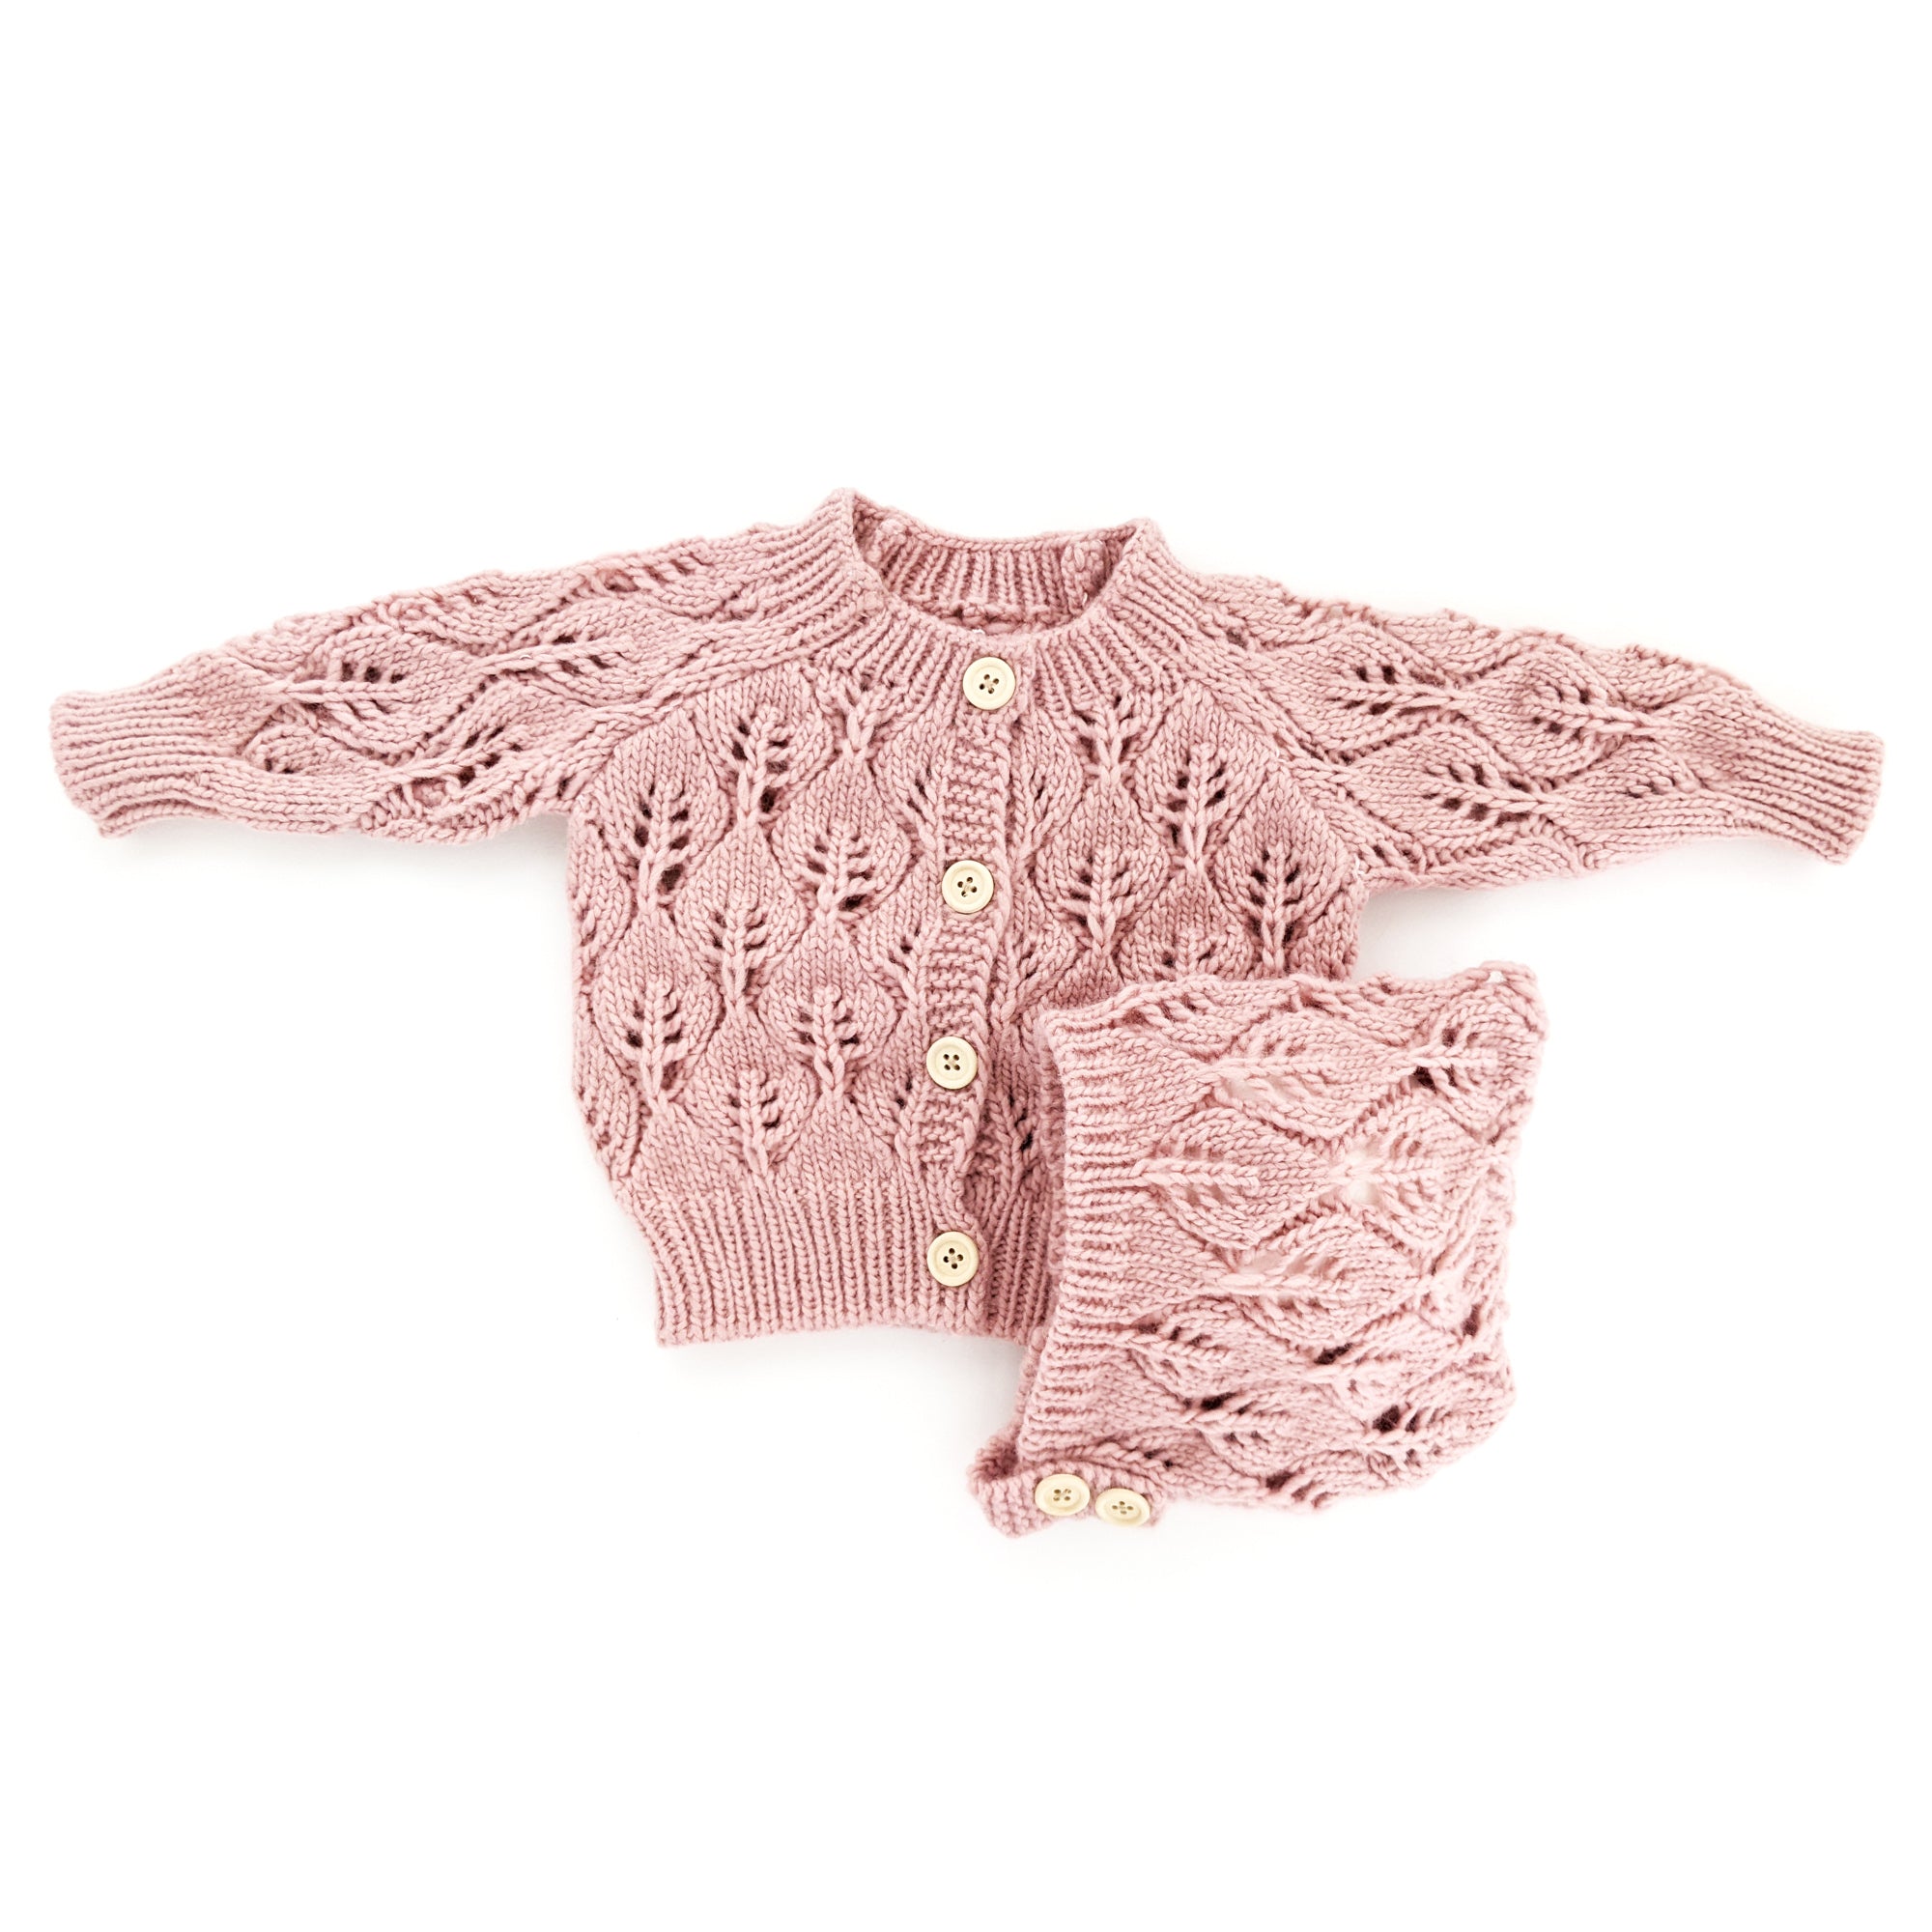 Huggalugs_Rosey Leaf Lace Sweater_Tops